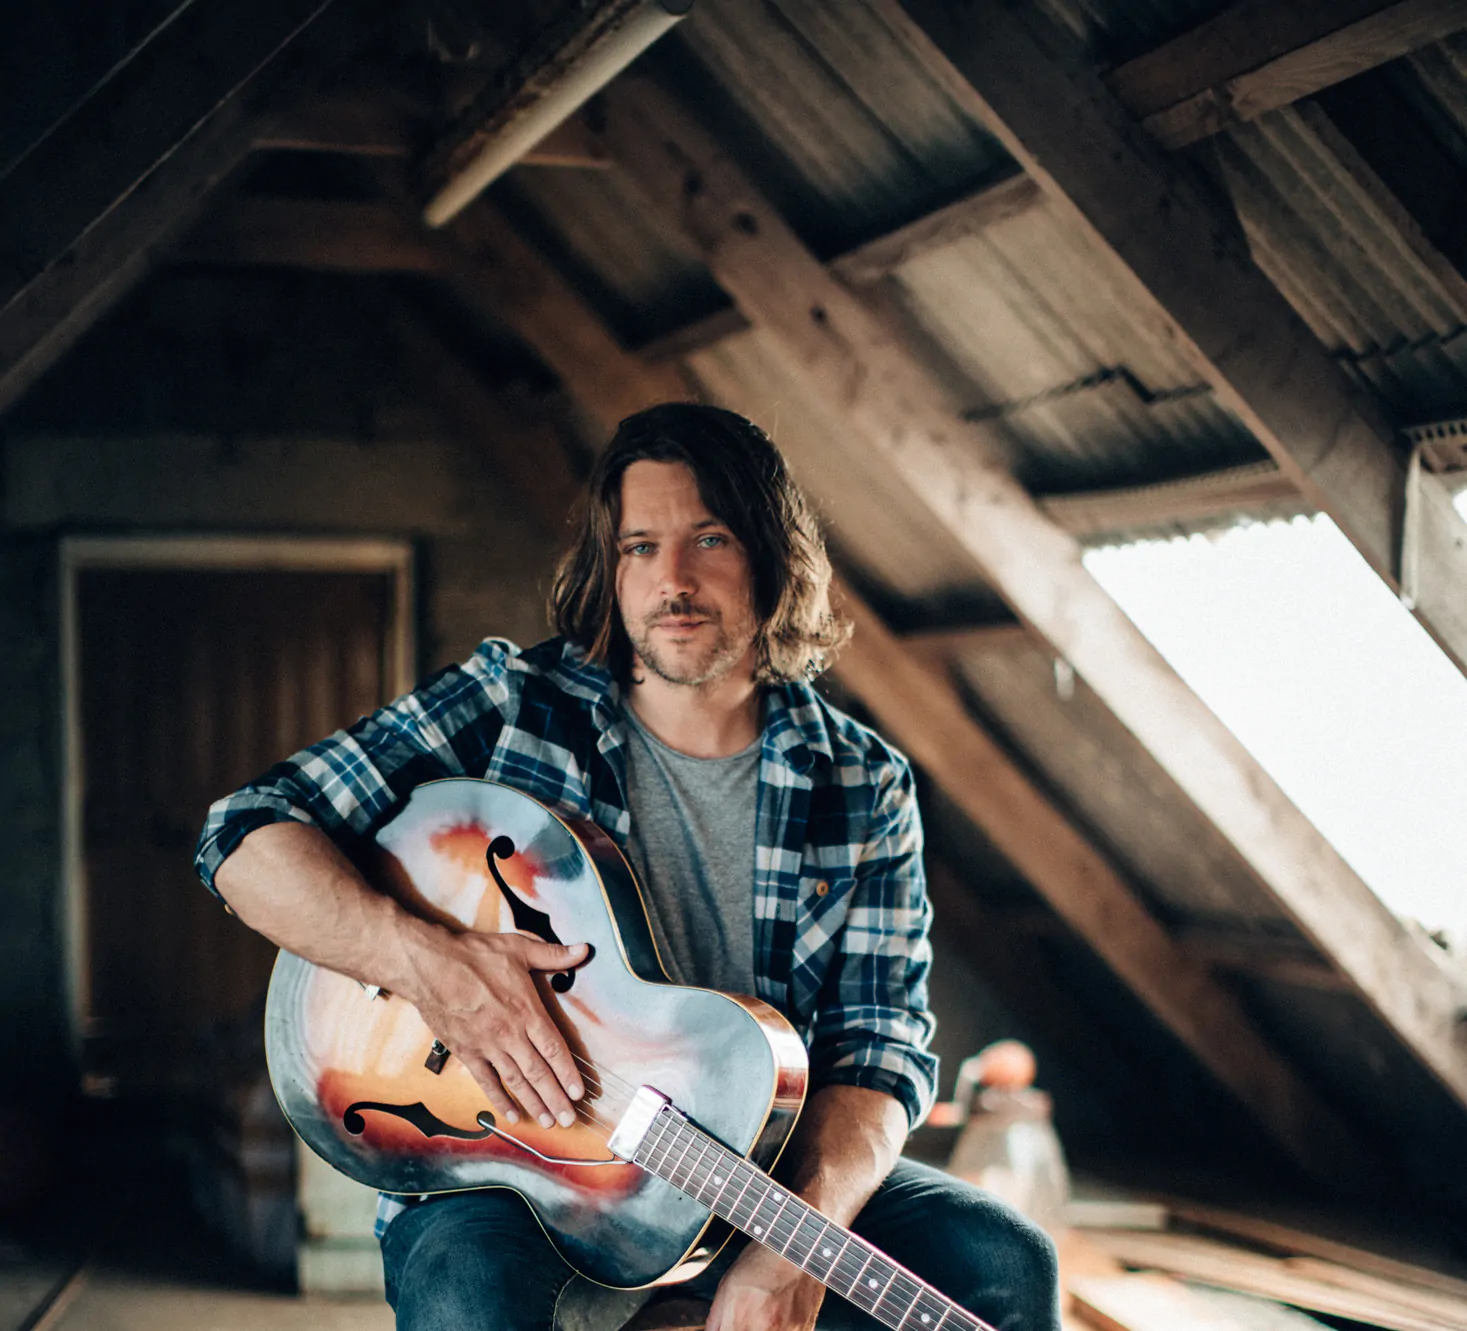 COLIN MACLEOD releases single with SHERYL CROW & announces new album